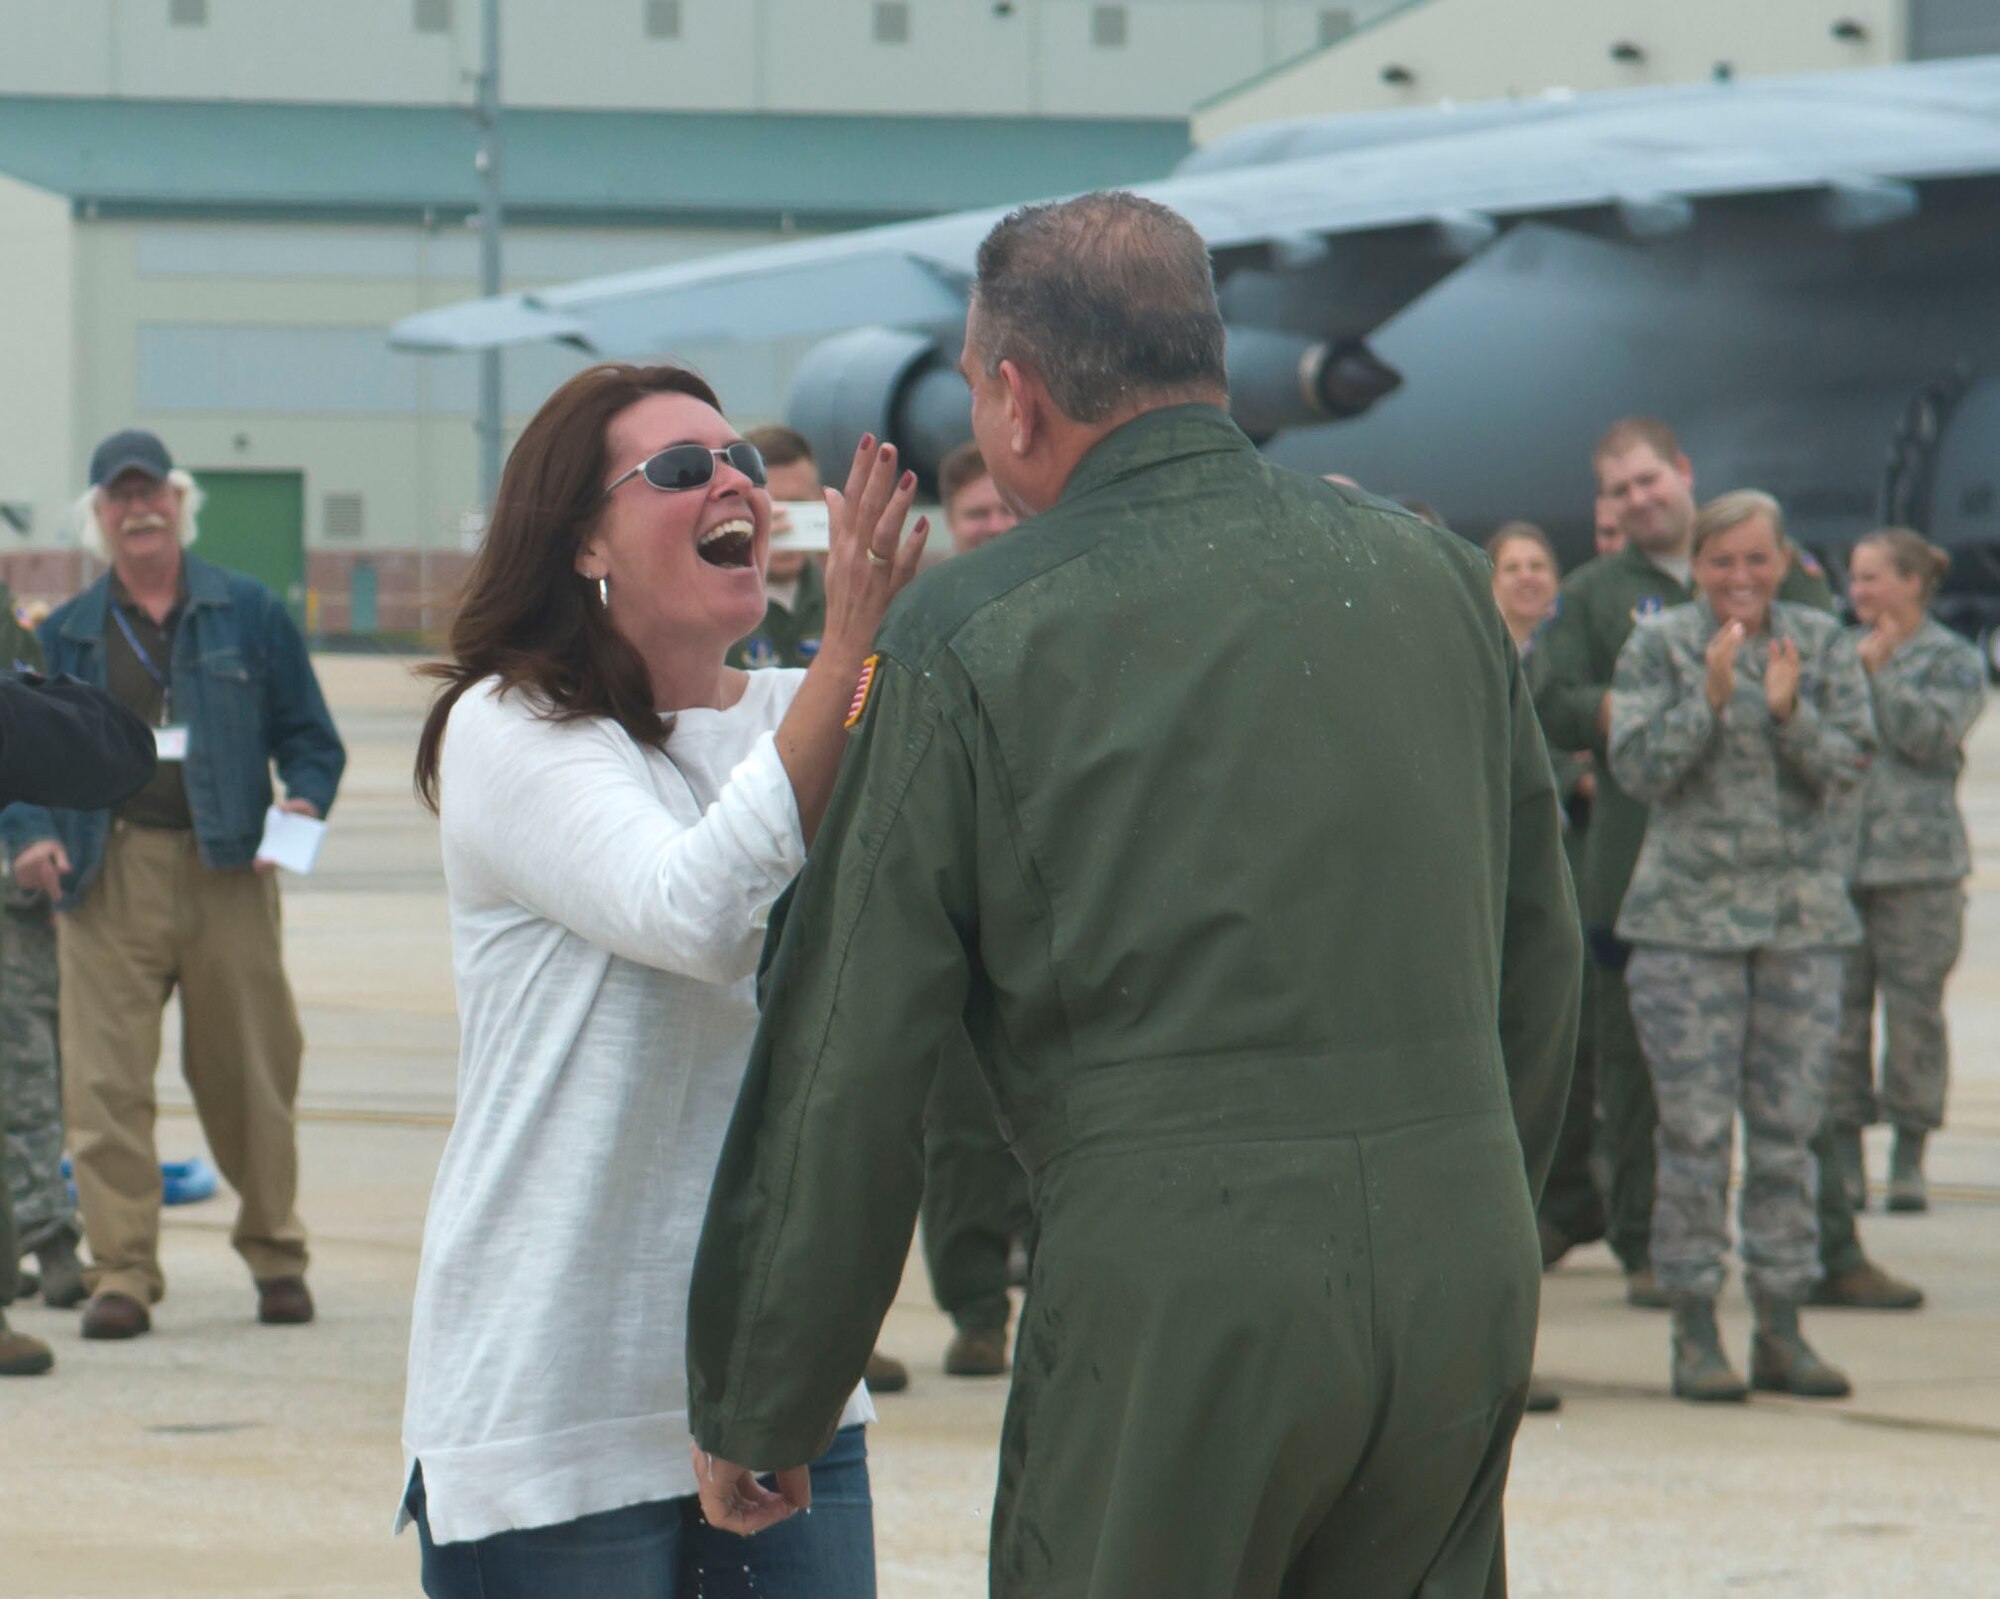 MARTINSBURG, W.Va.-- The first C-17 Globemaster III arrived at the 167th Airlift Wing in Martinsburg, W. Va. on September 25th, 2014.  The wing has flown the C-5 Galaxy since 2007 and will begin C-17 flying operations in January 2015. The last C-5 unit in the Air National Guard, the 167th began the conversion process in July and will maintain a fleet of eight C-17s. (U.S. Air National Guard photo by Tech. Sgt. Michael Dickson/Released)